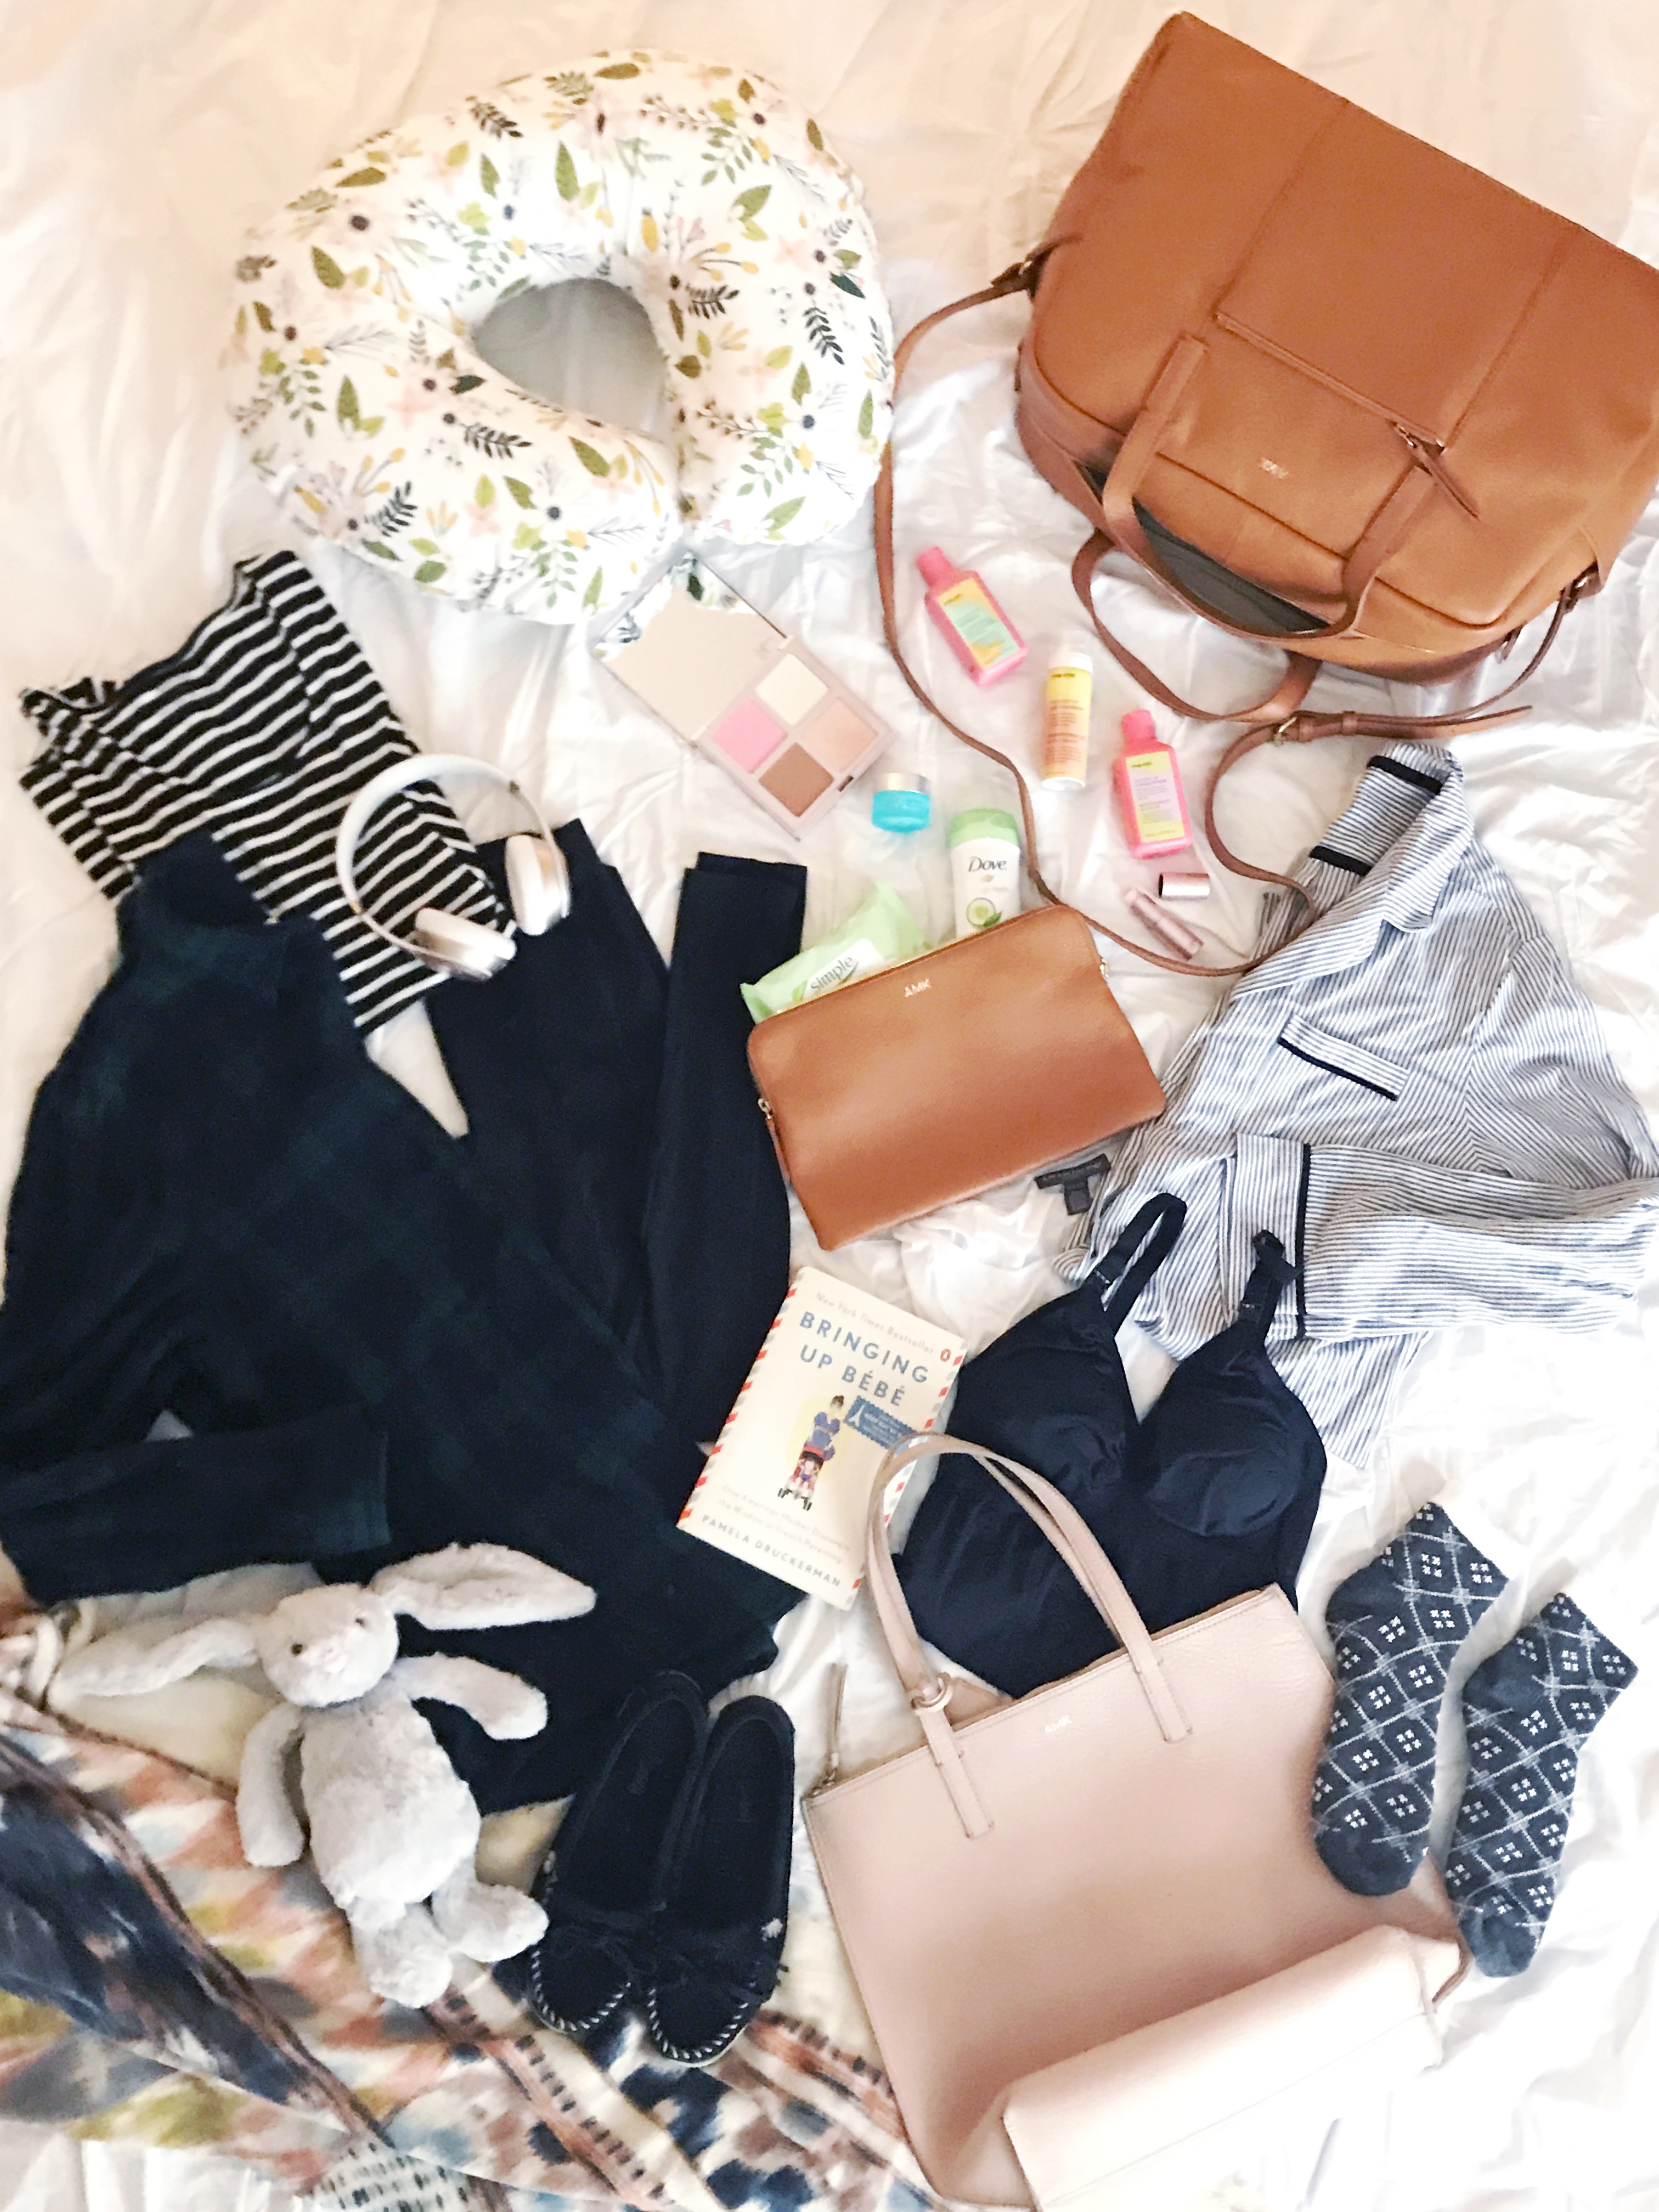 A complete packing list of what to pack in your hospital bag for labor and delivery. | Top Houston life and style blog, Lone Star Looking Glass, features the 15 Hospital Bag Essentials you need.